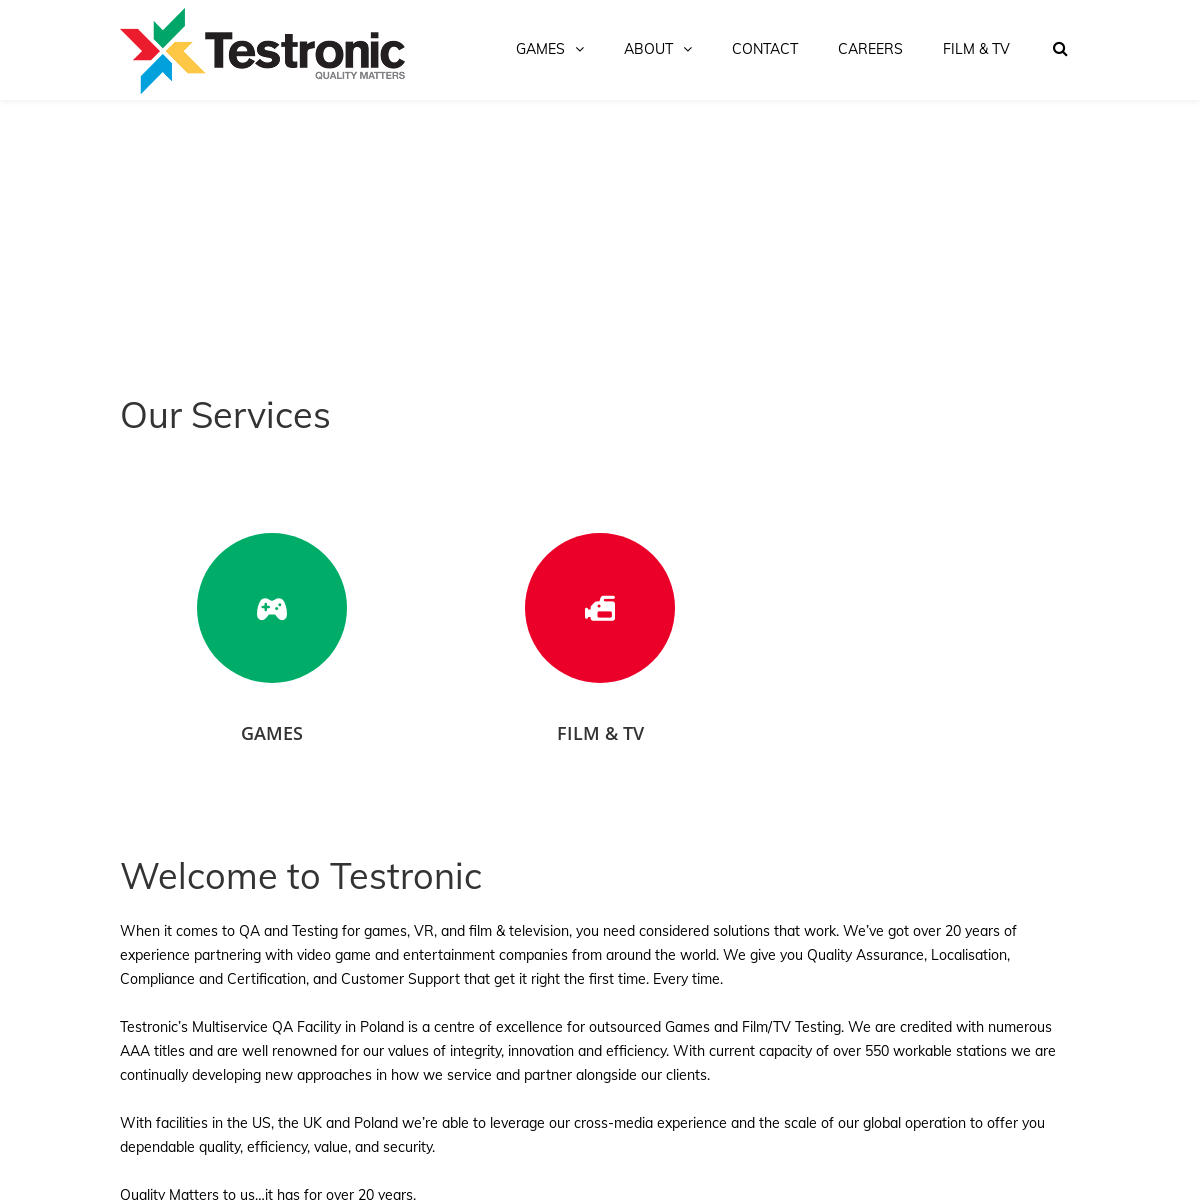 A complete backup of testroniclabs.com